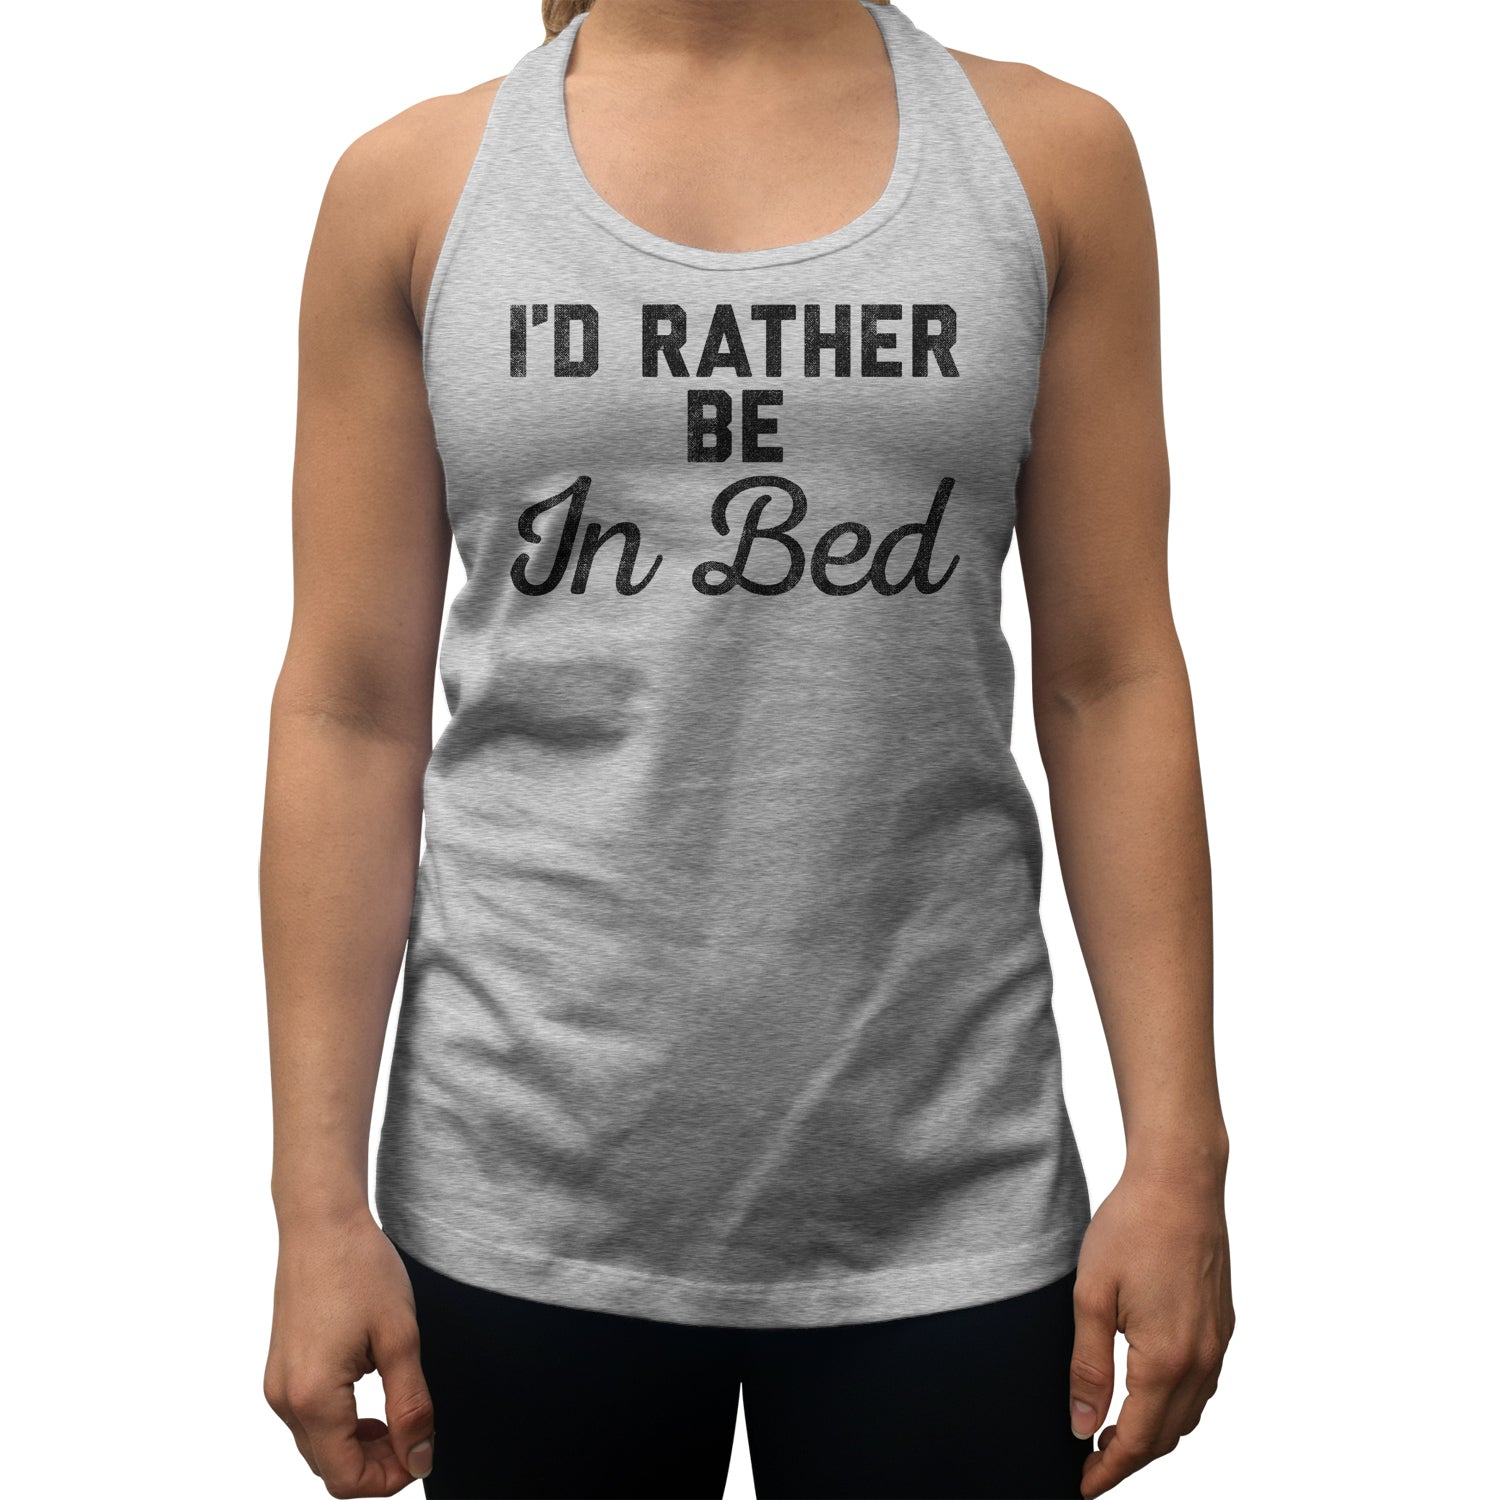 Women's I'd Rather Be in Bed Racerback Tank Top